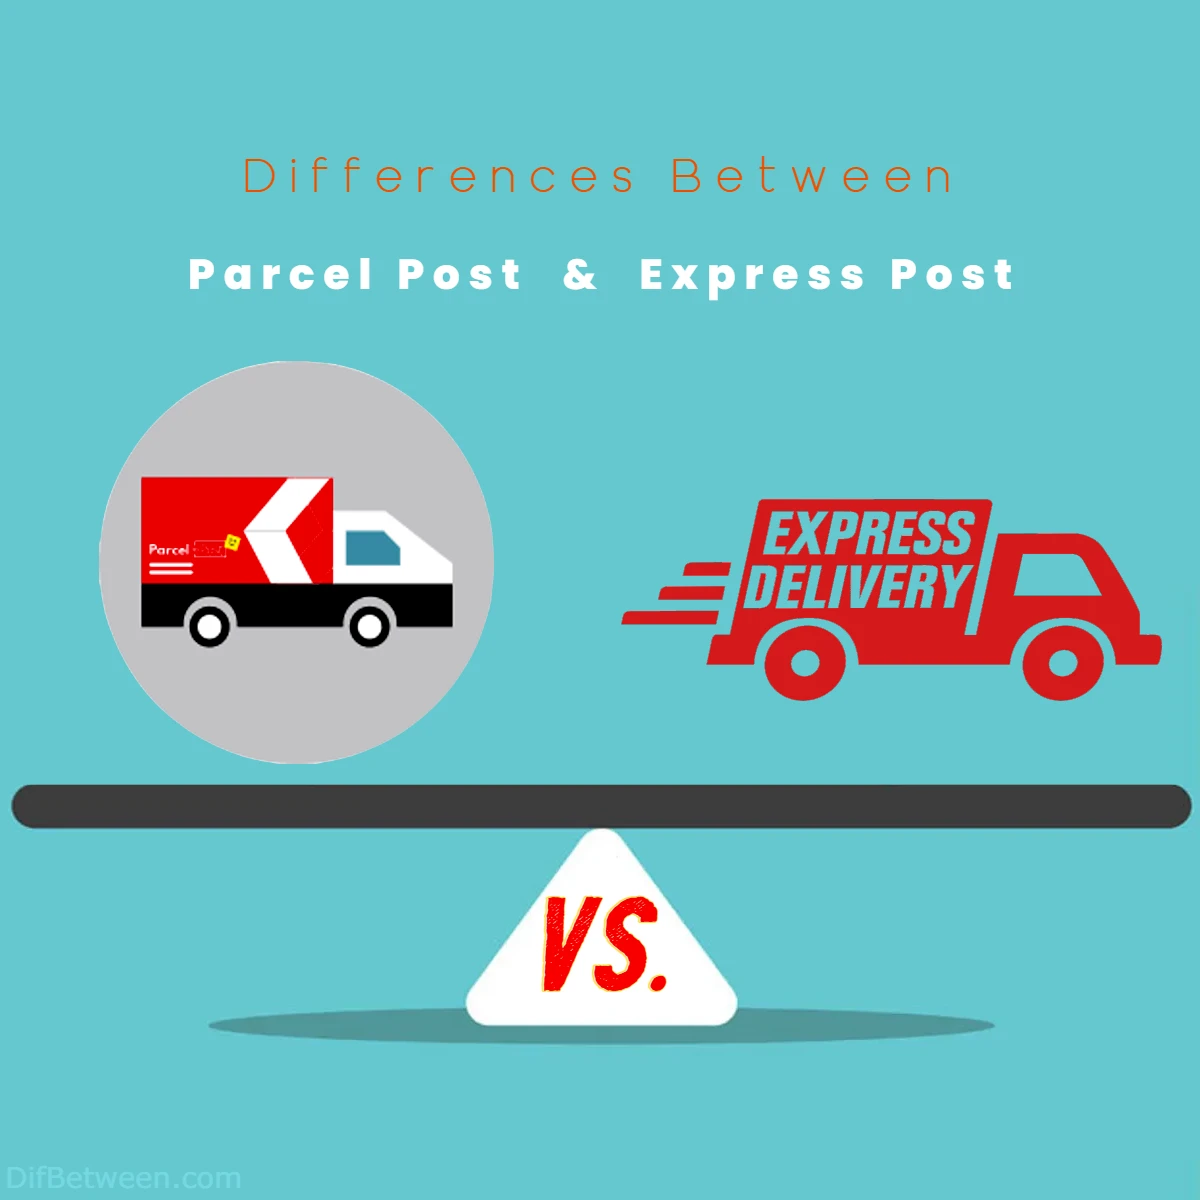 Differences Between Parcel Post vs Express Post